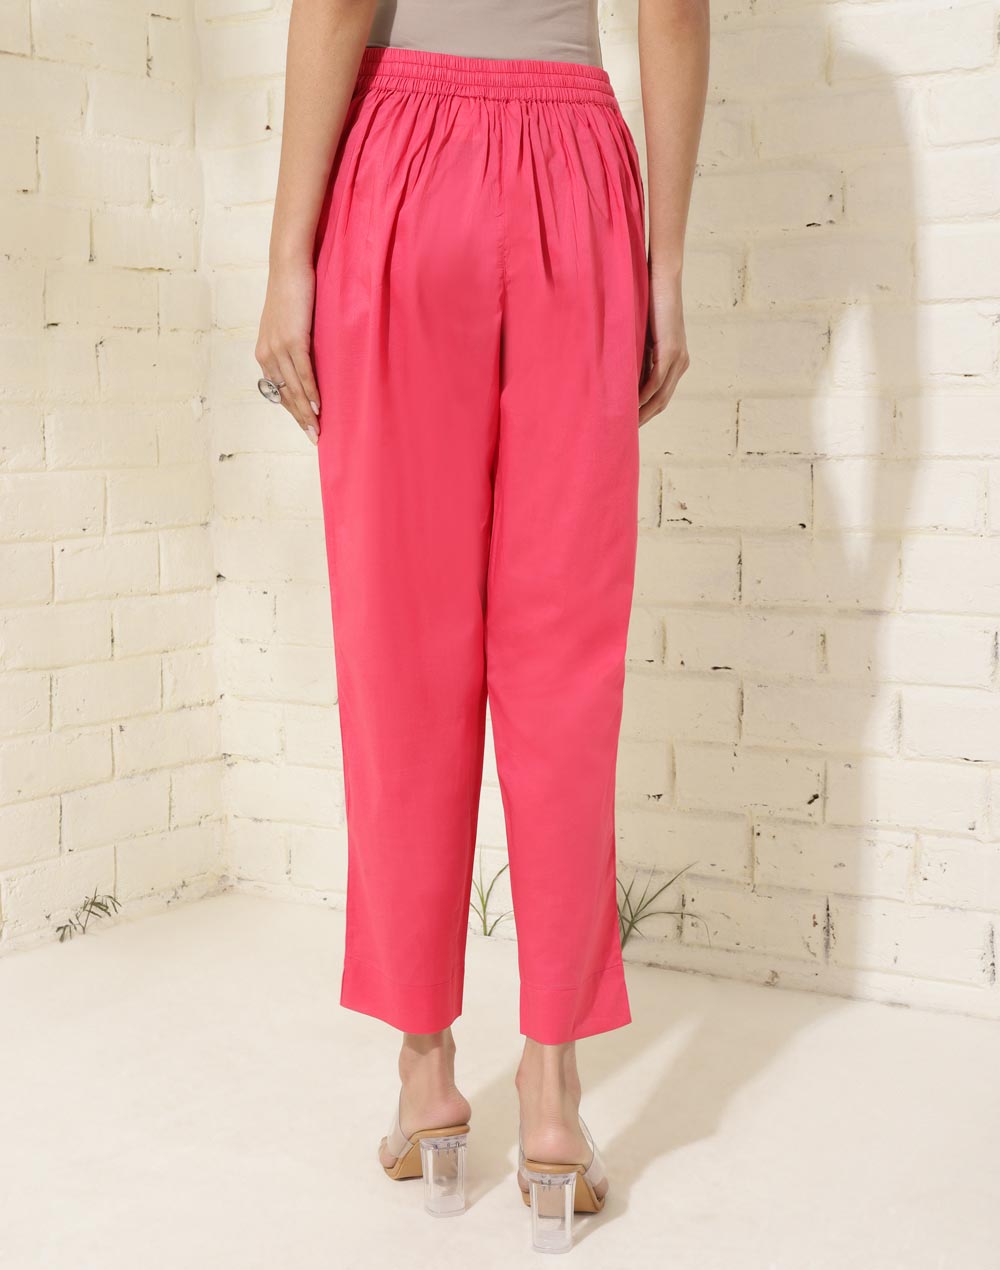 Buy Casual Pants for Women, Casual Trousers for Women Online at Fabindia